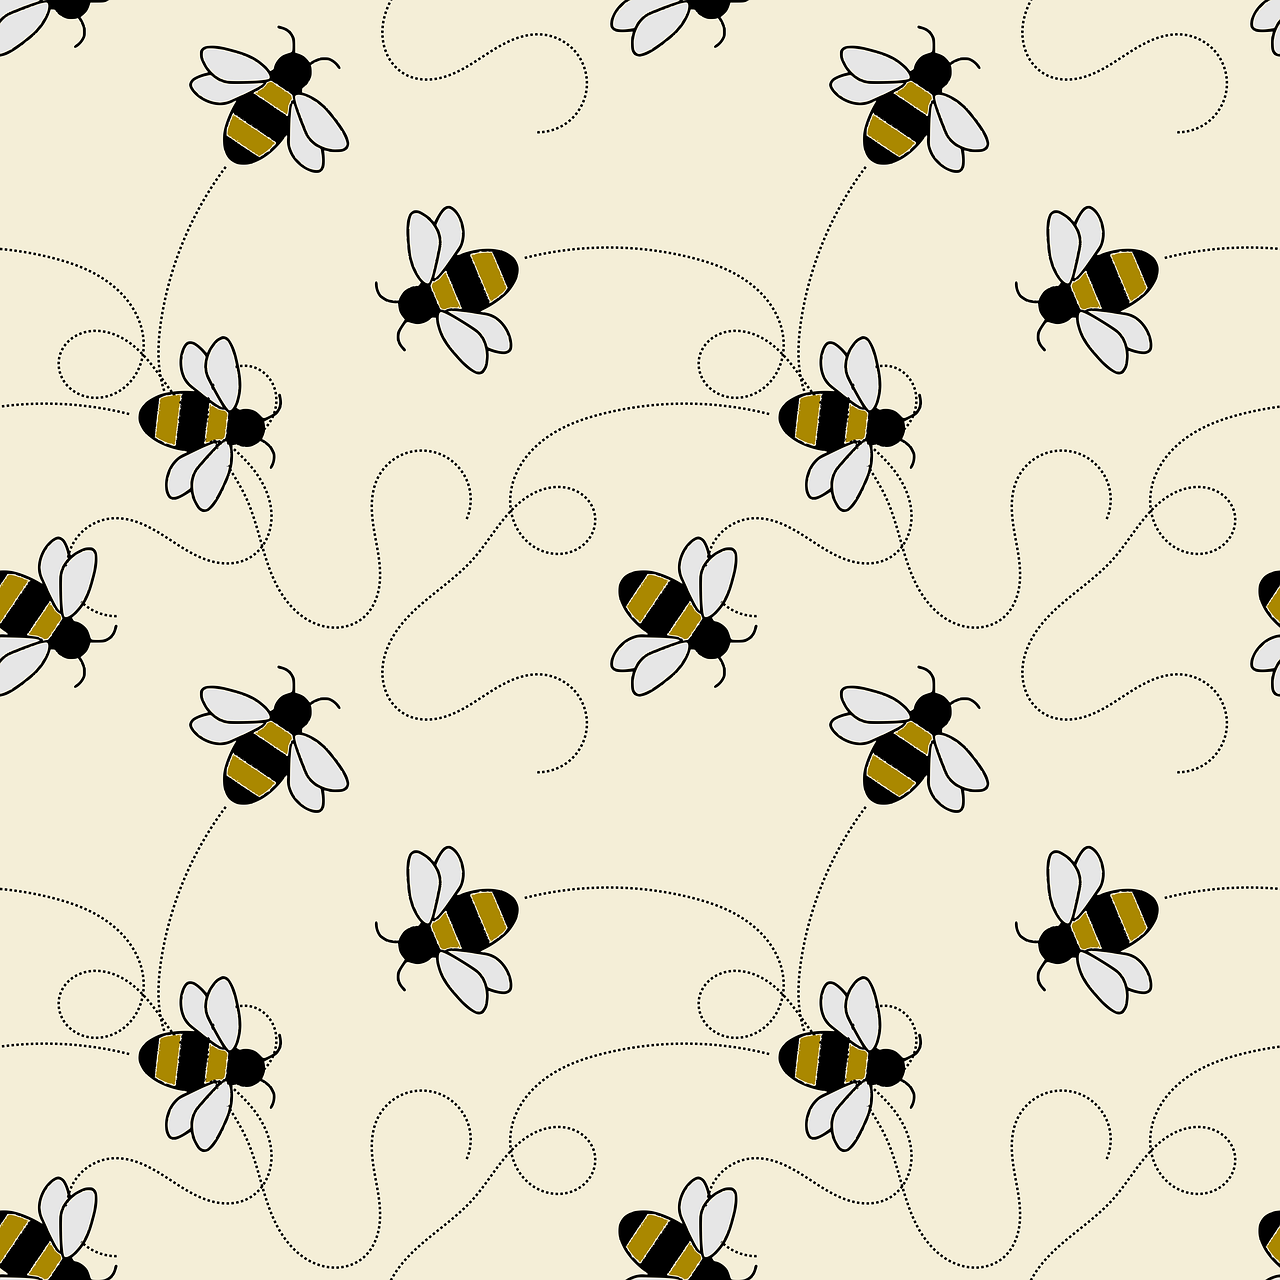 a group of bees flying through the air, an illustration of, by Lisa Milroy, shutterstock, seamless pattern, cream, simple illustration, swirling